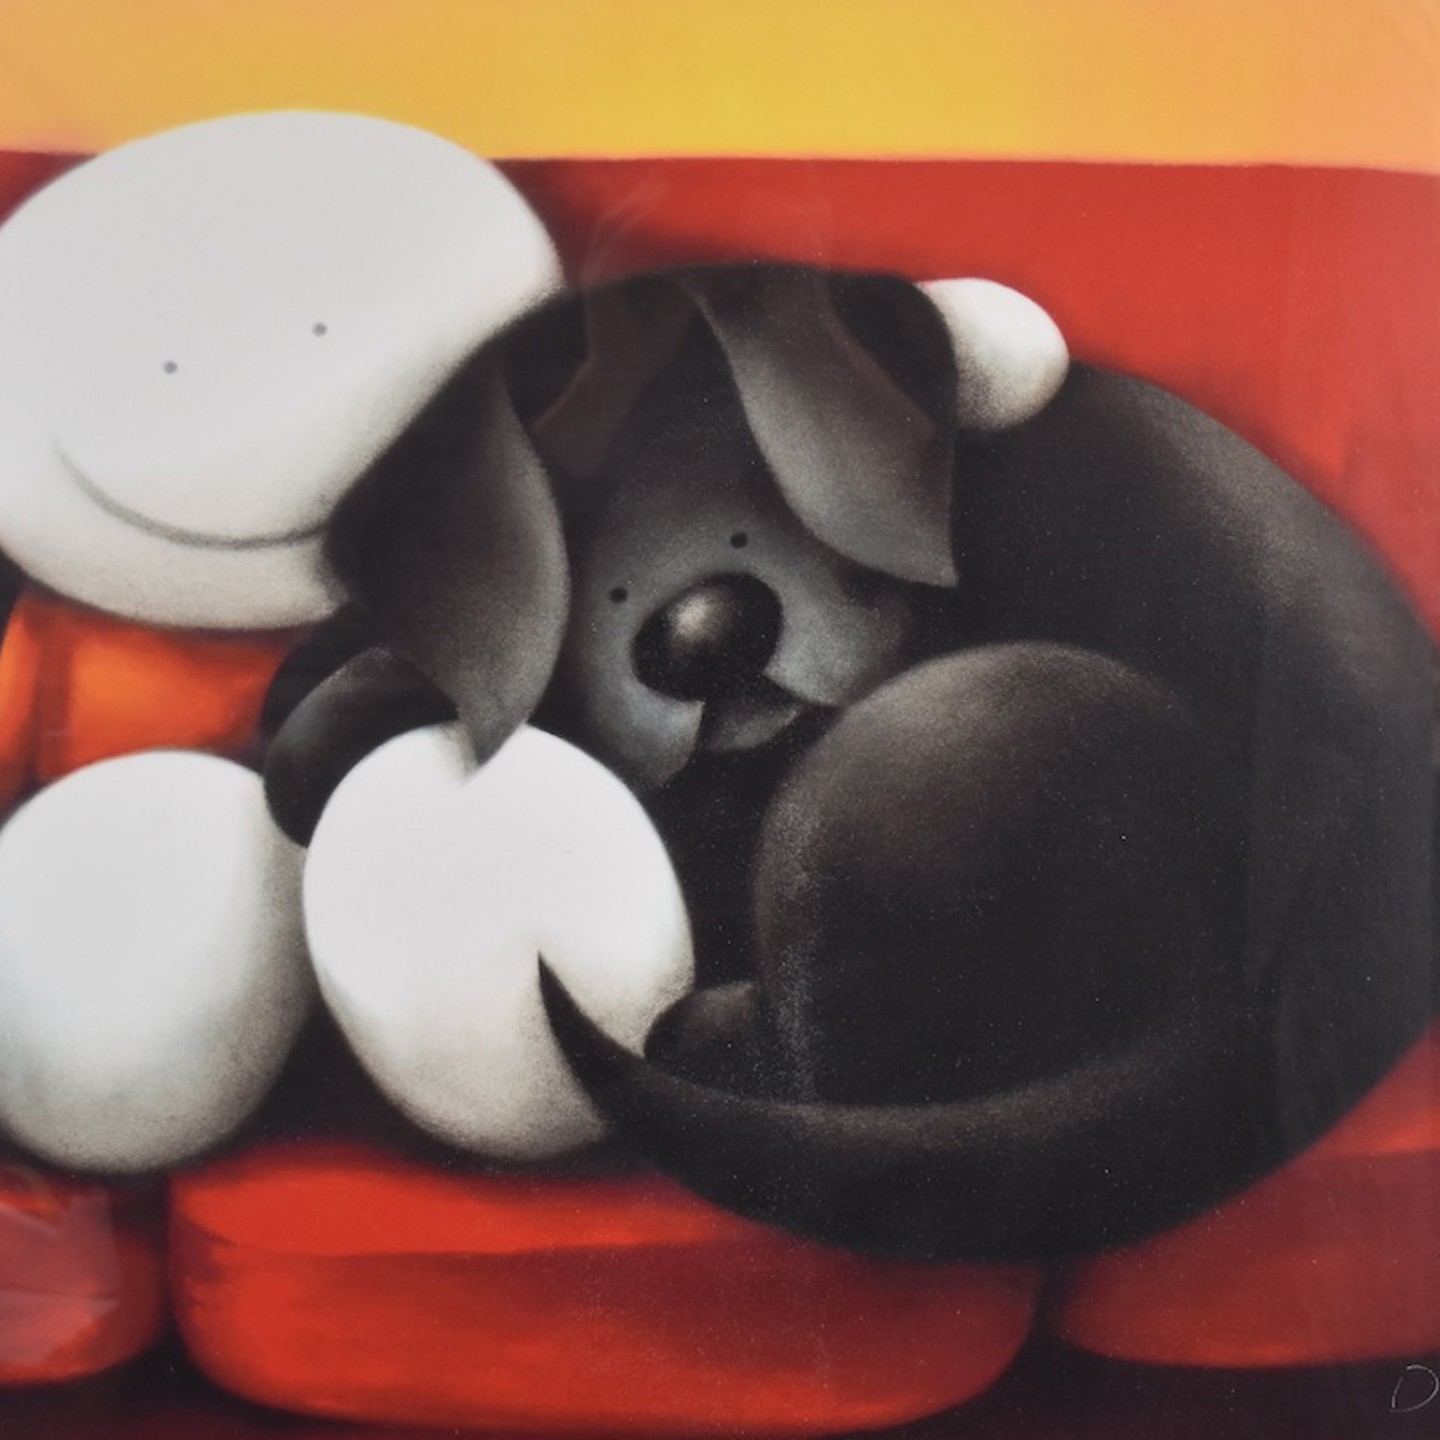 Doug Hyde Signed Limited Edition (88150) Print 'A Great Night In' Sold Ś580